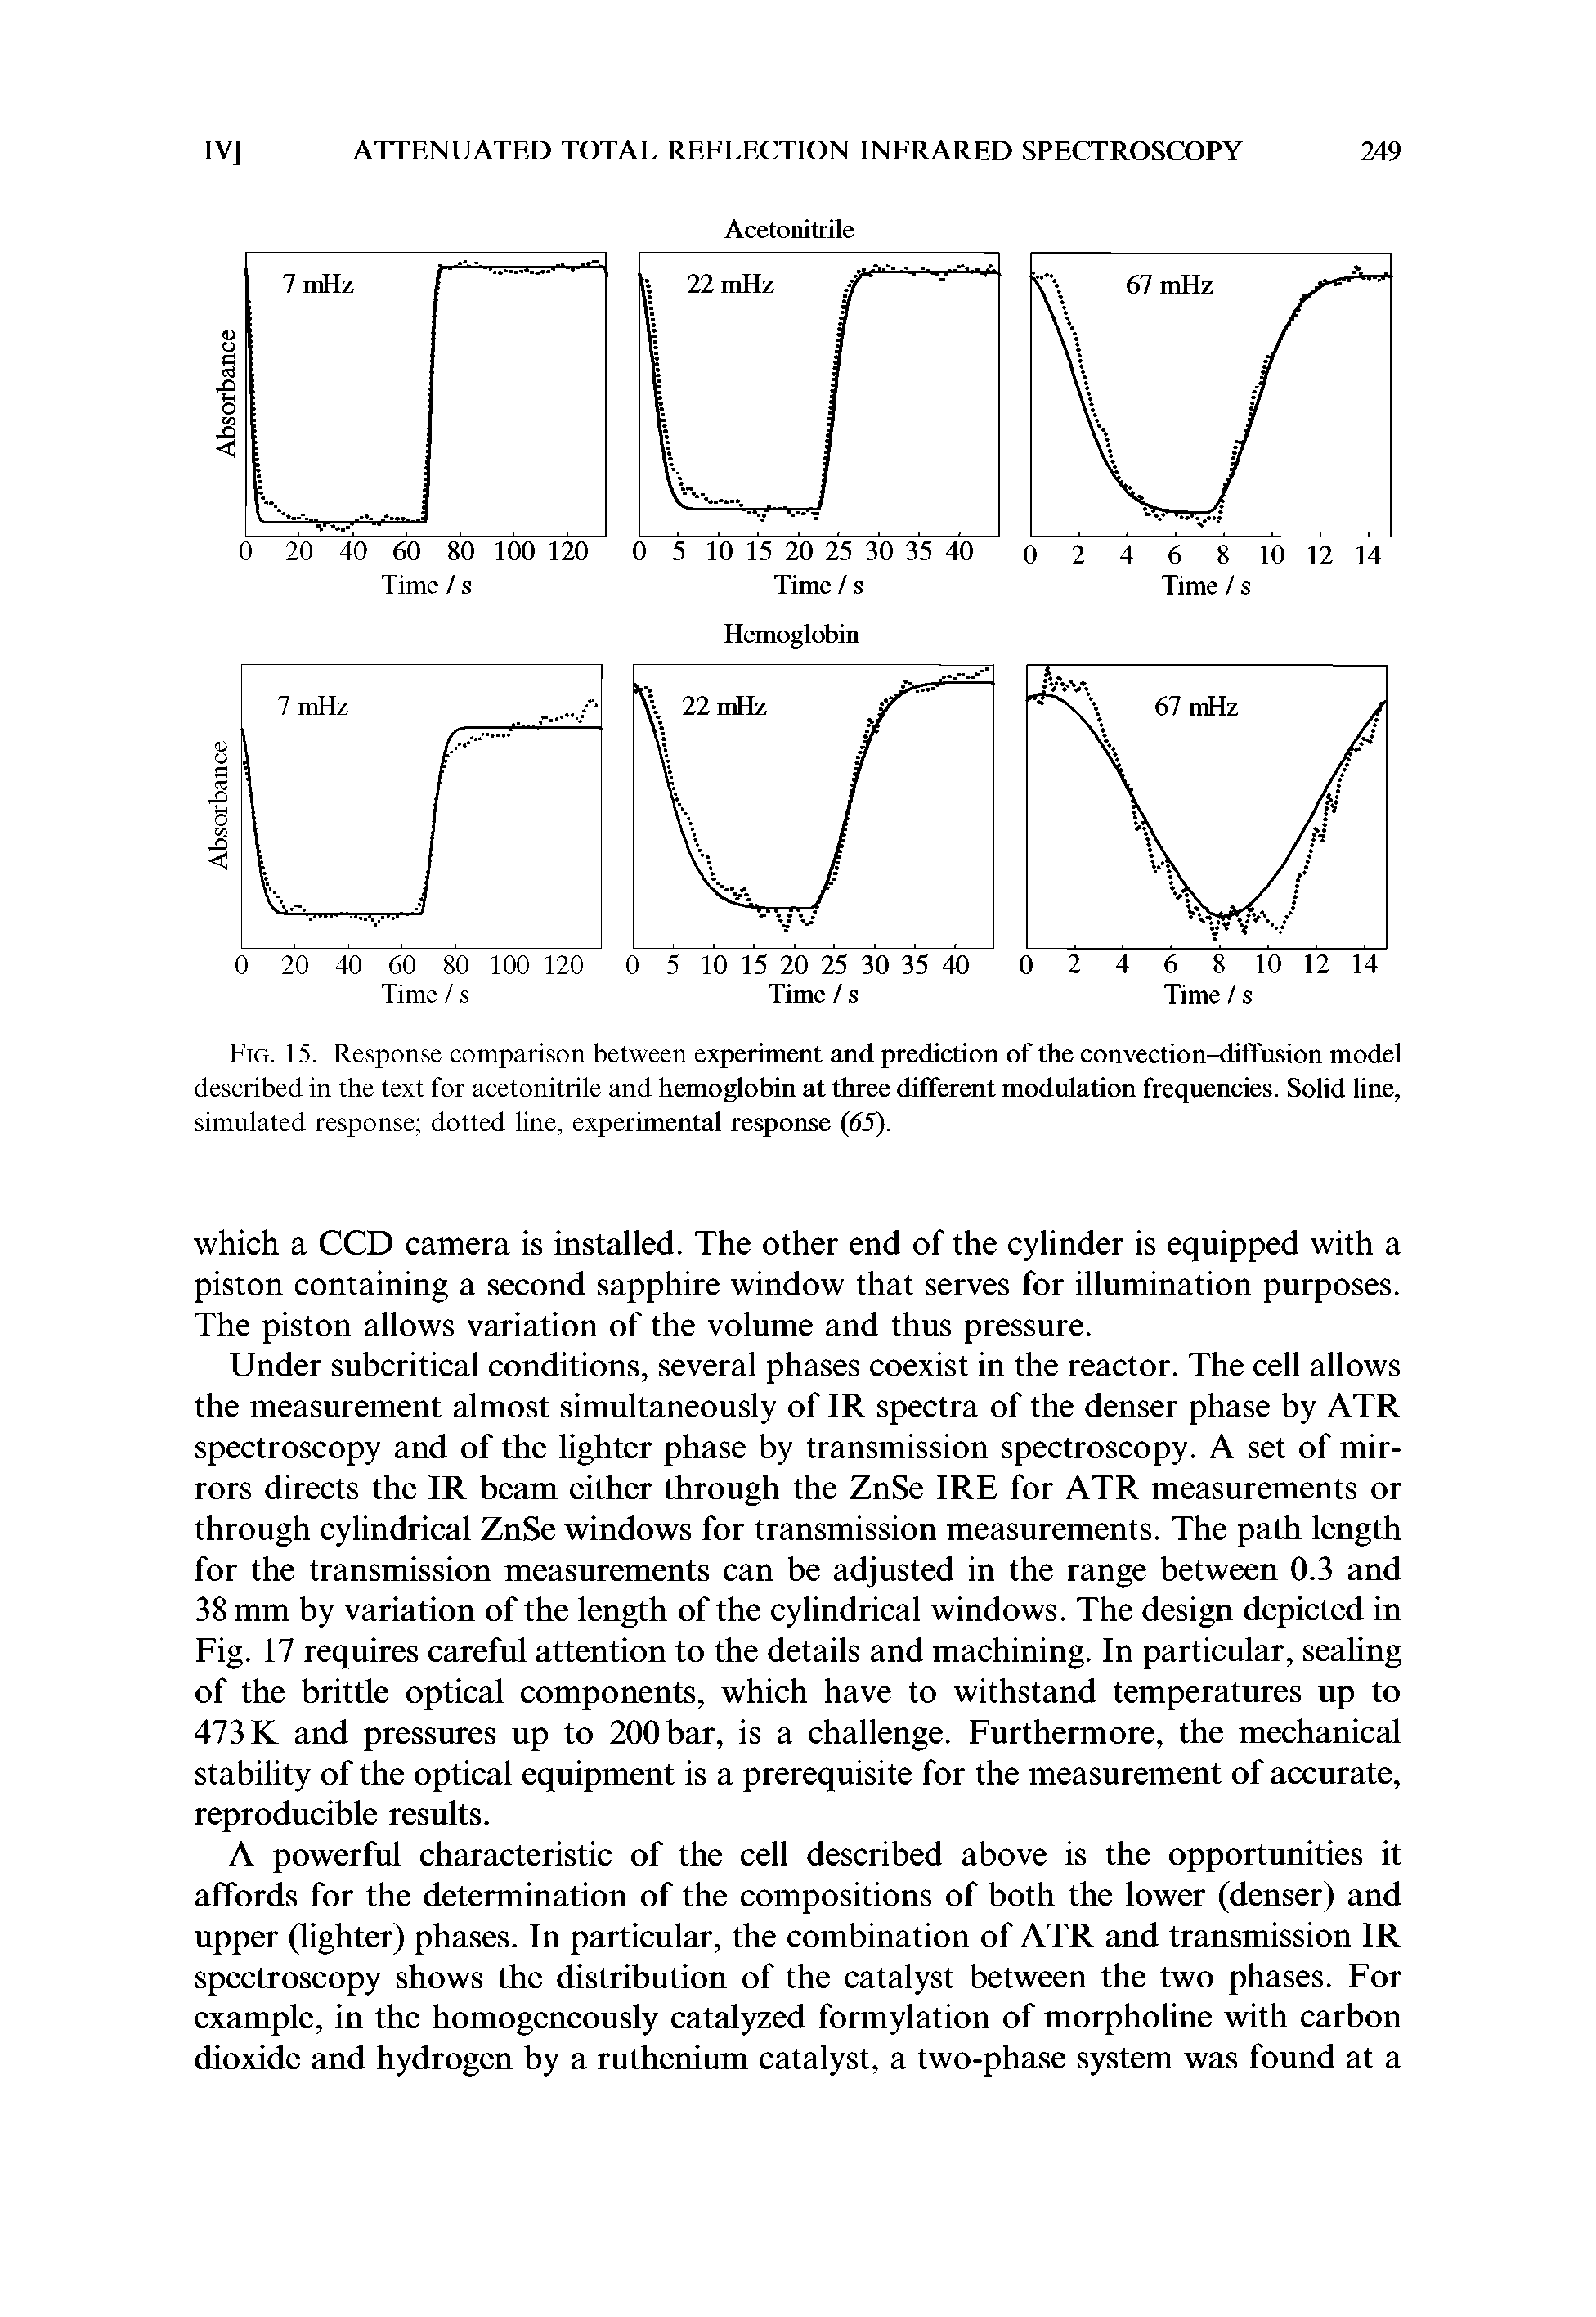 Fig. 15. Response comparison between experiment and prediction of the convection-diffusion model described in the text for acetonitrile and hemoglobin at three different modulation frequencies. Solid line, simulated response dotted line, experimental response (65).